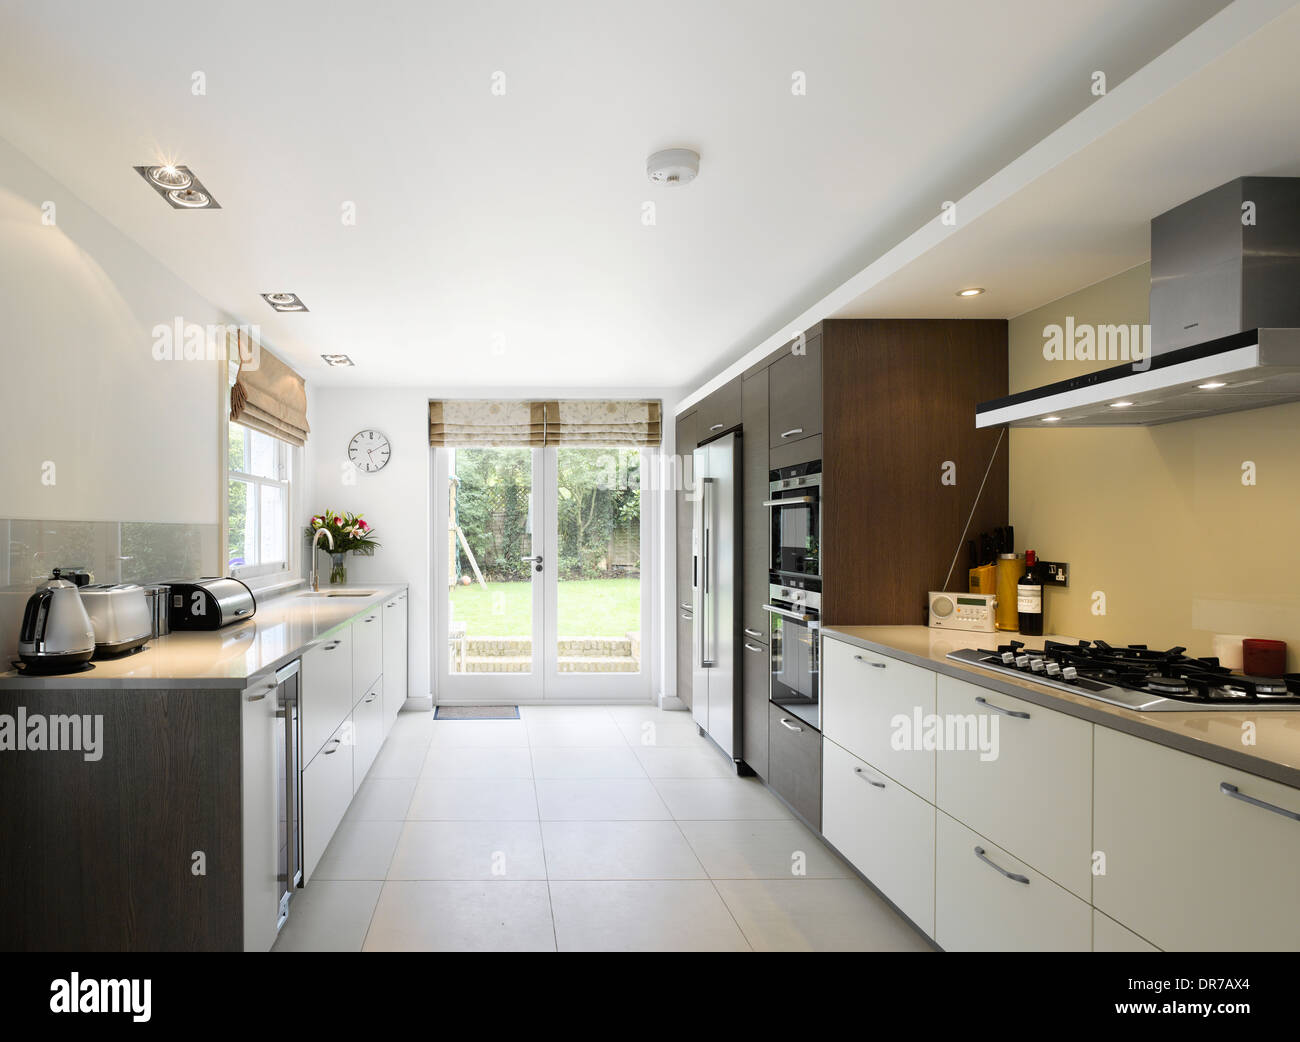 Modern kitchen with white fitted units Stock Photo